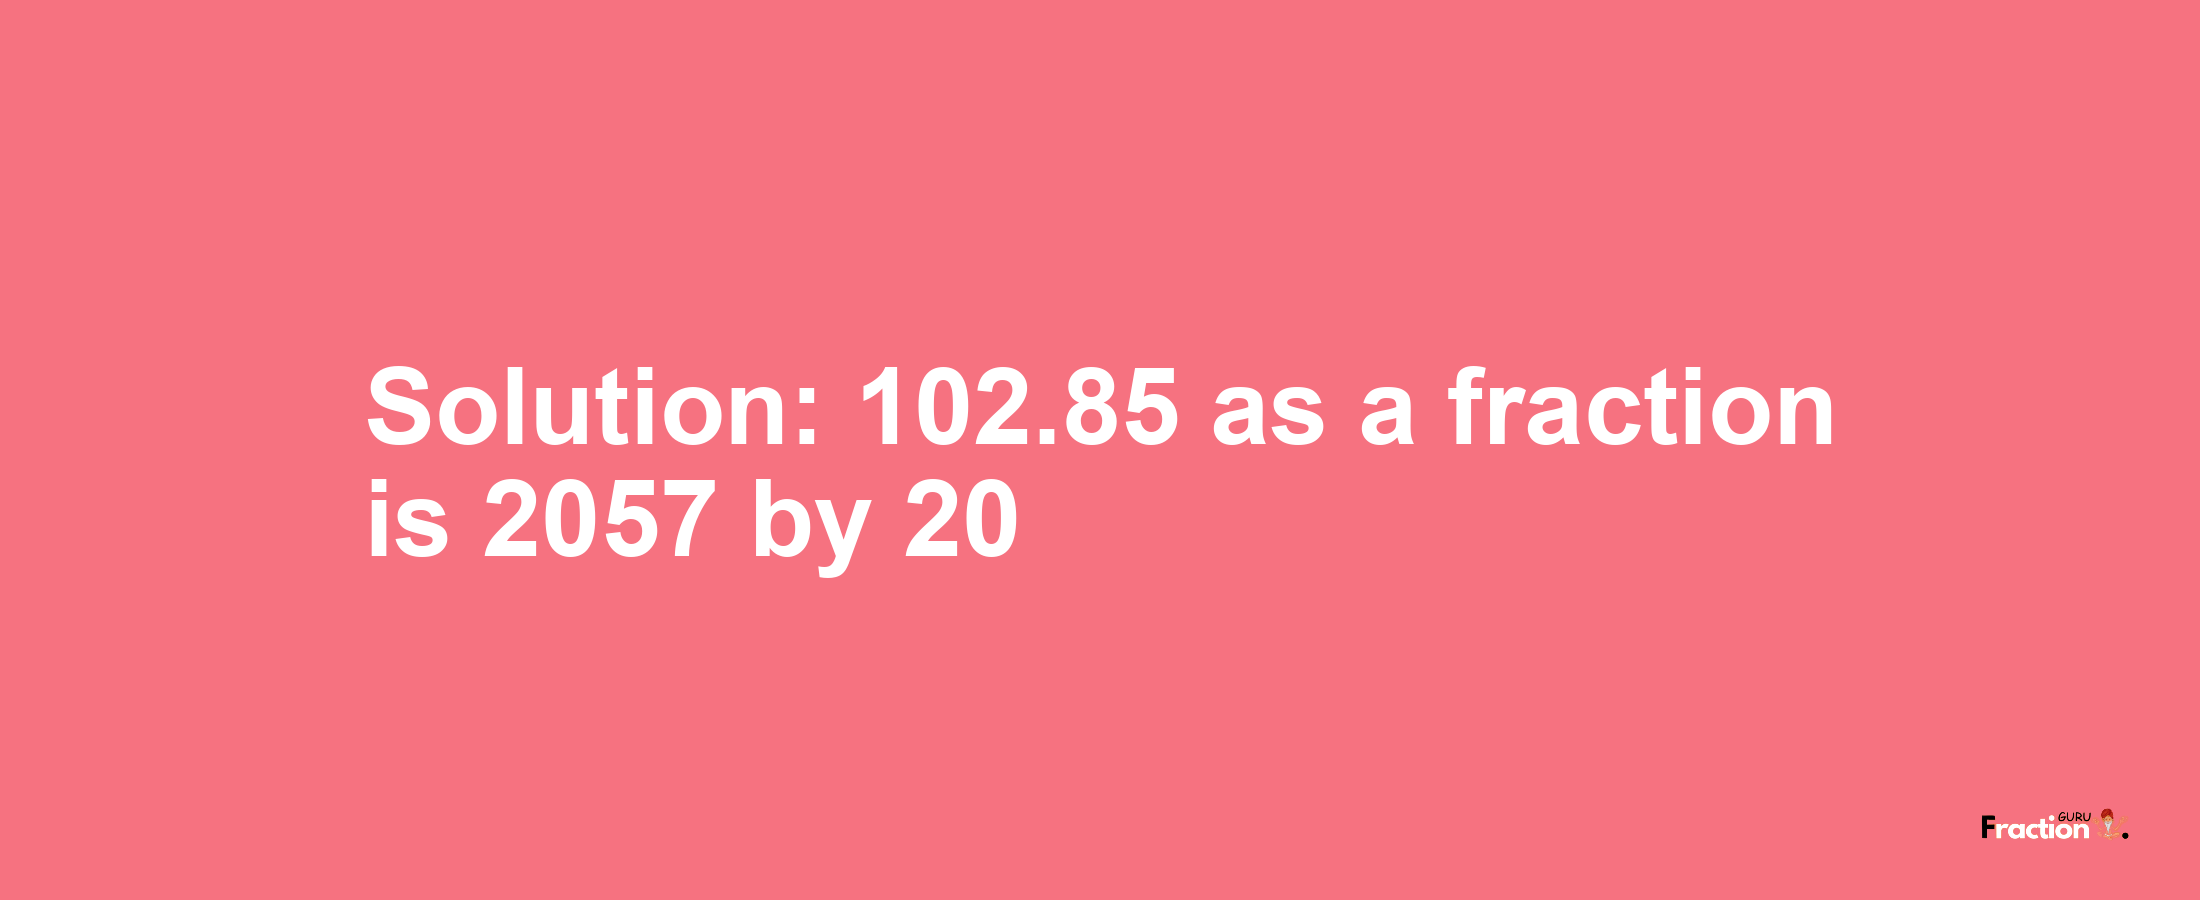 Solution:102.85 as a fraction is 2057/20